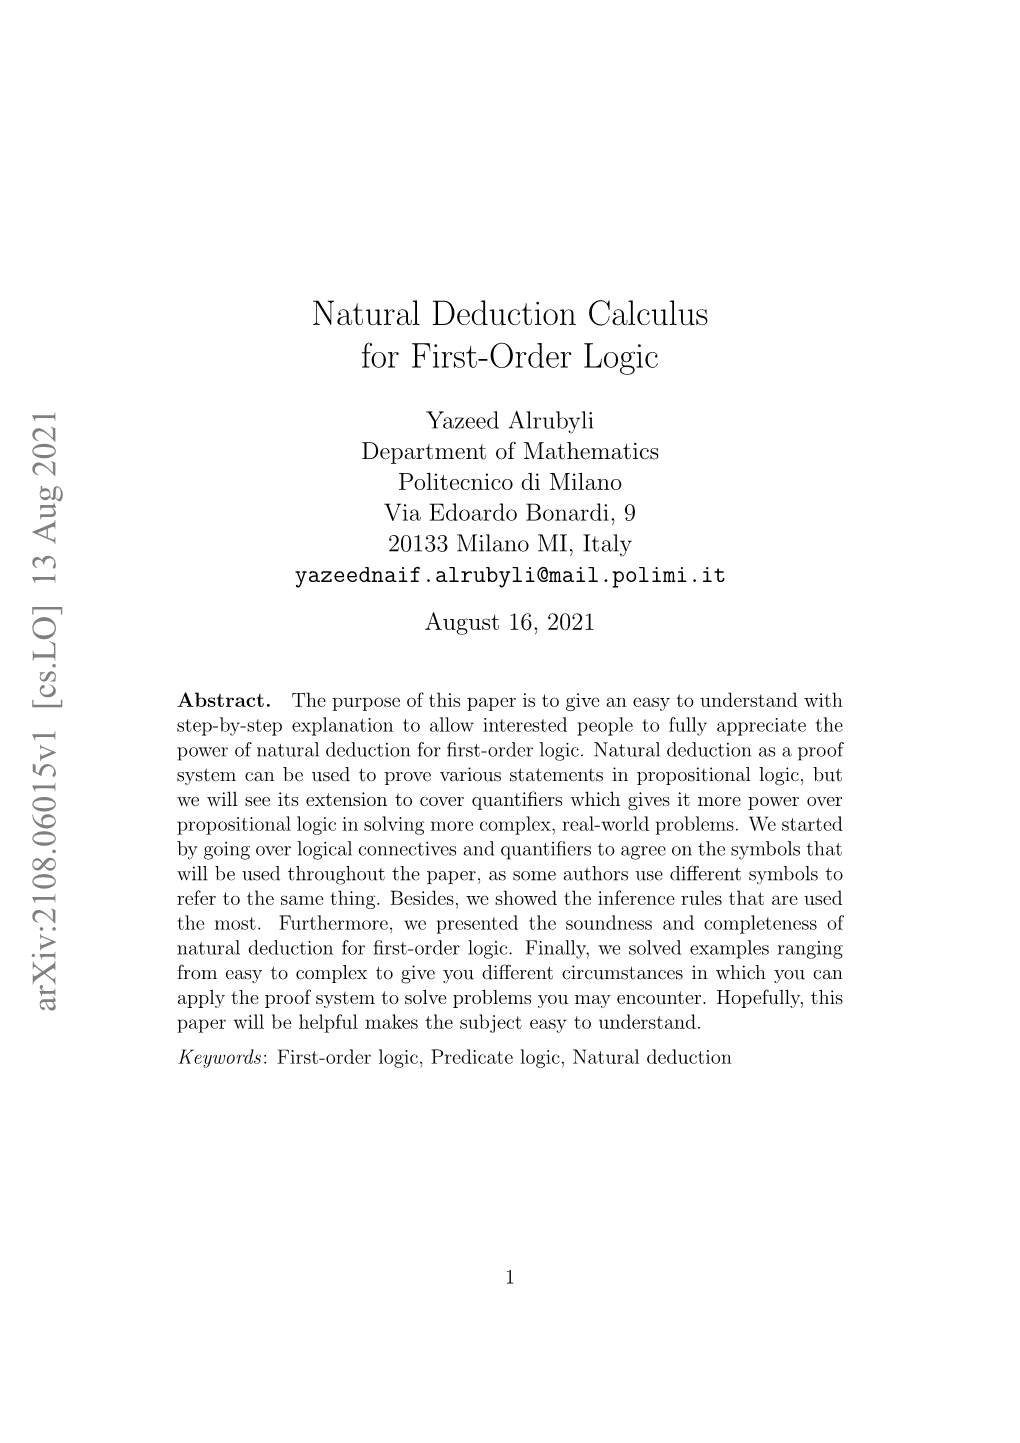 Natural Deduction Calculus for First-Order Logic